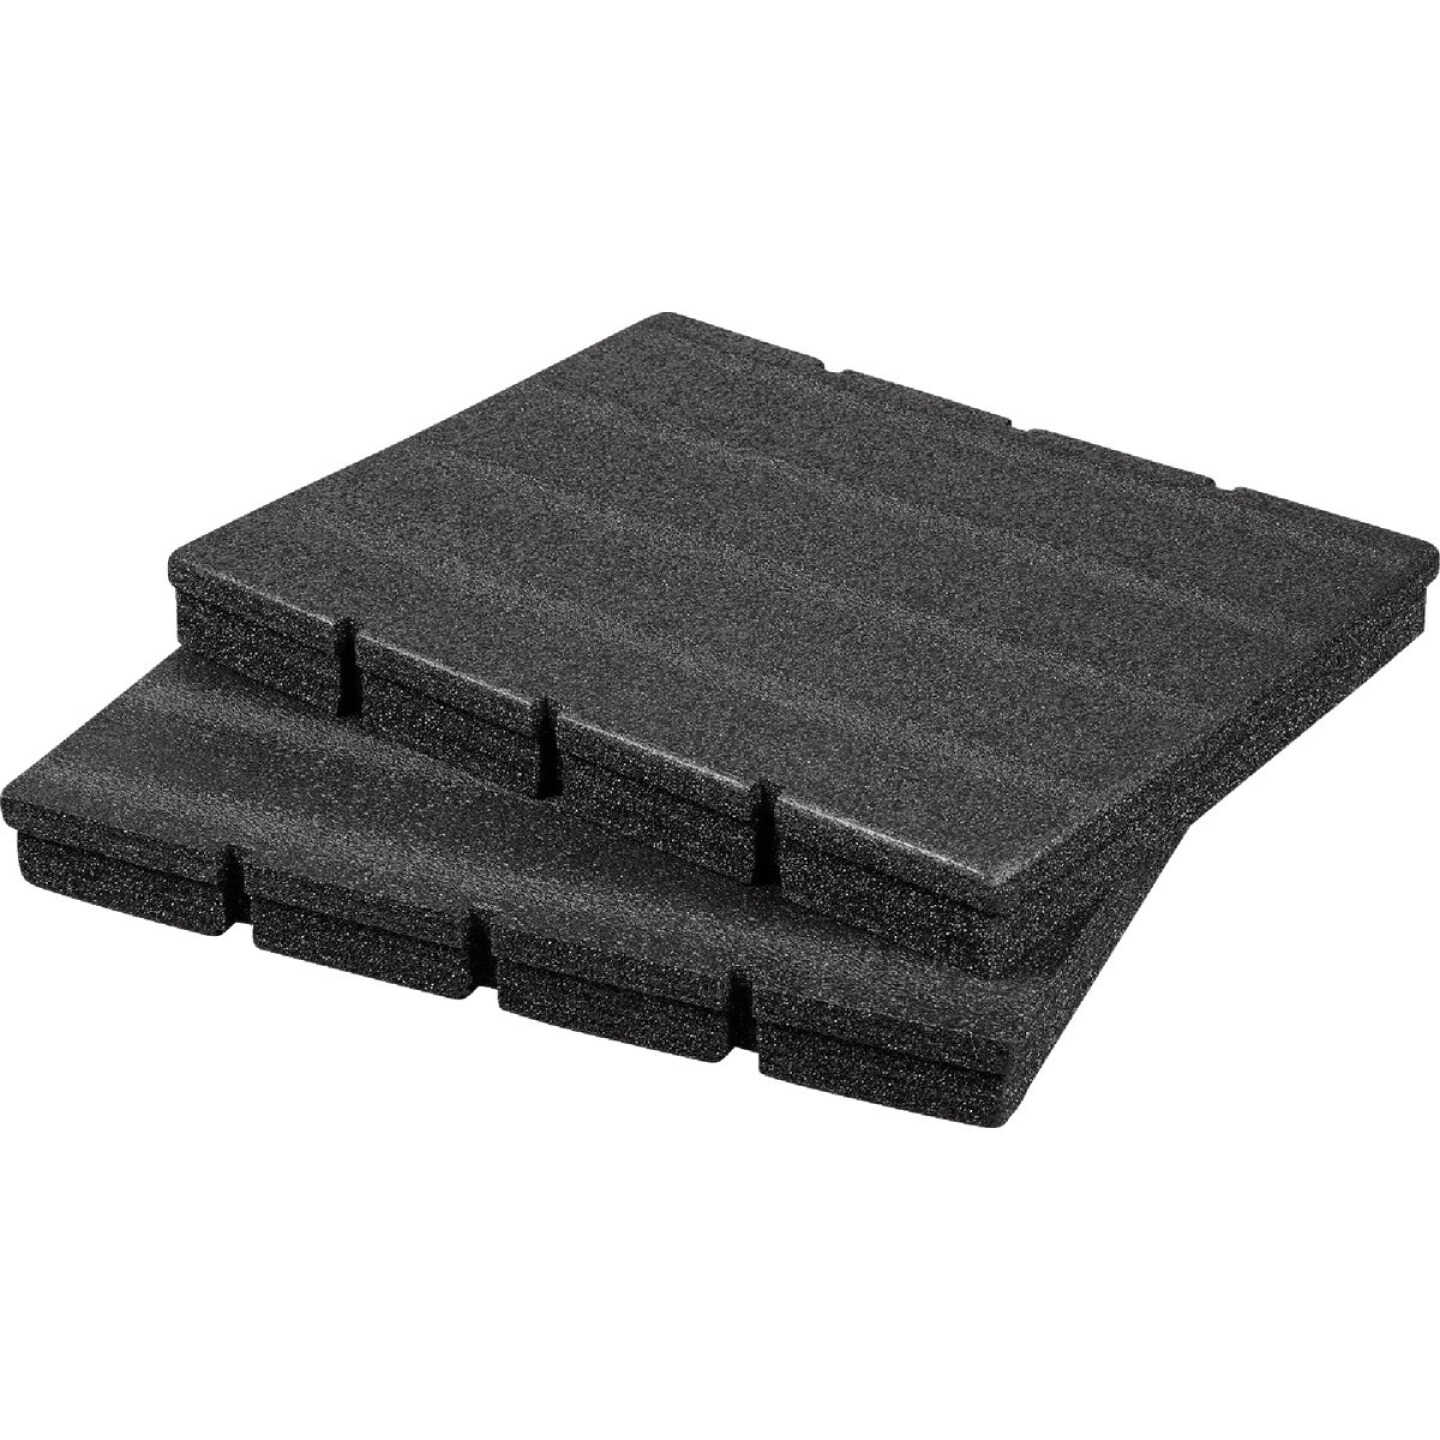 Milwaukee Low-Profile Customizable Foam Insert for PACKOUT Drawer